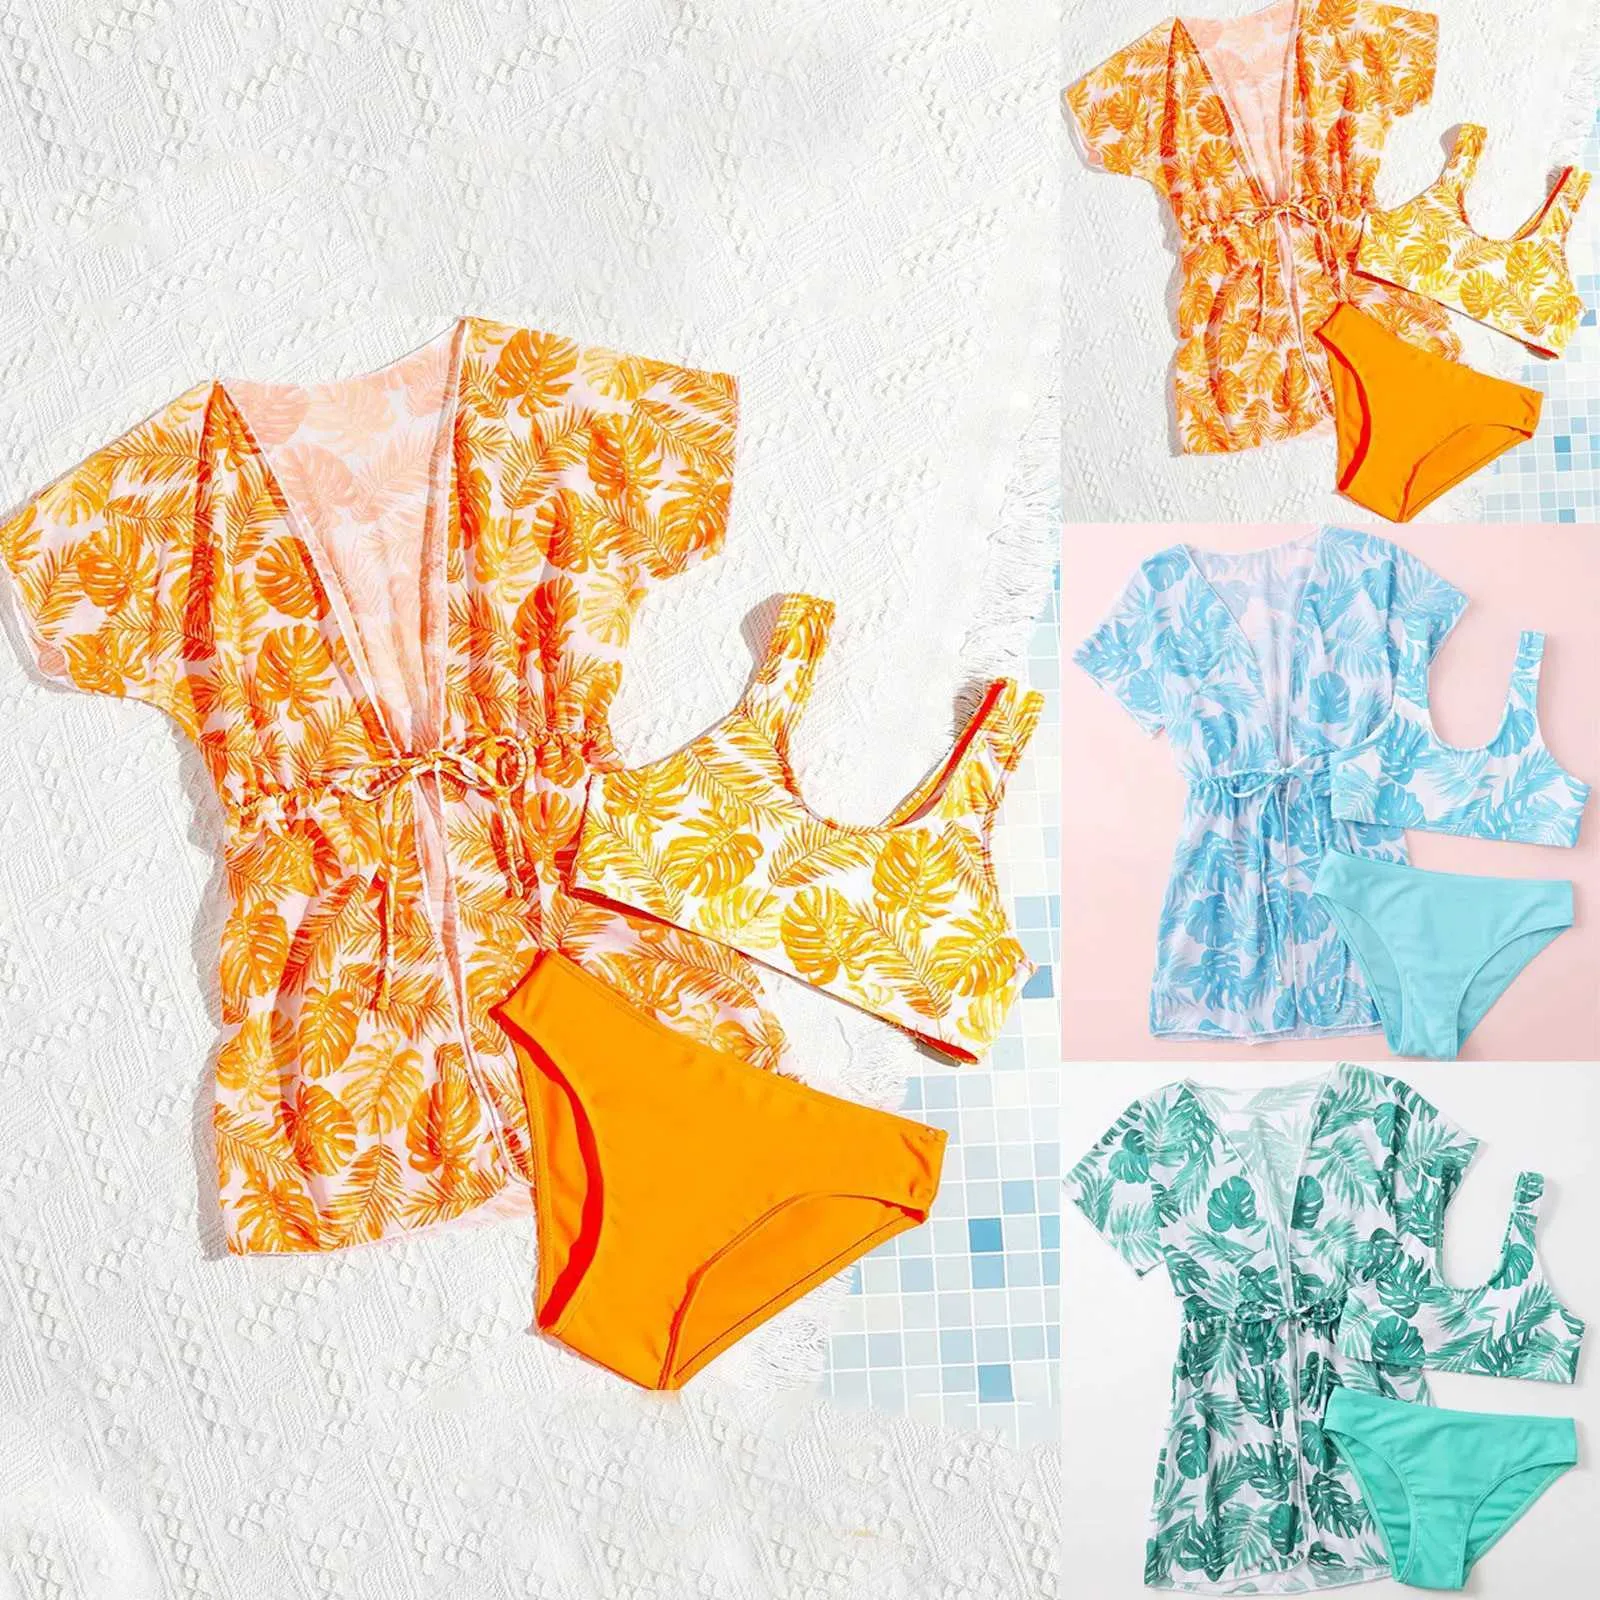 One-Pieces Kids Swimsuit Girls Leaves Print Bathing Suits Cute Bikini Swimsuit With Cover Up Teens Swimming Beachwear